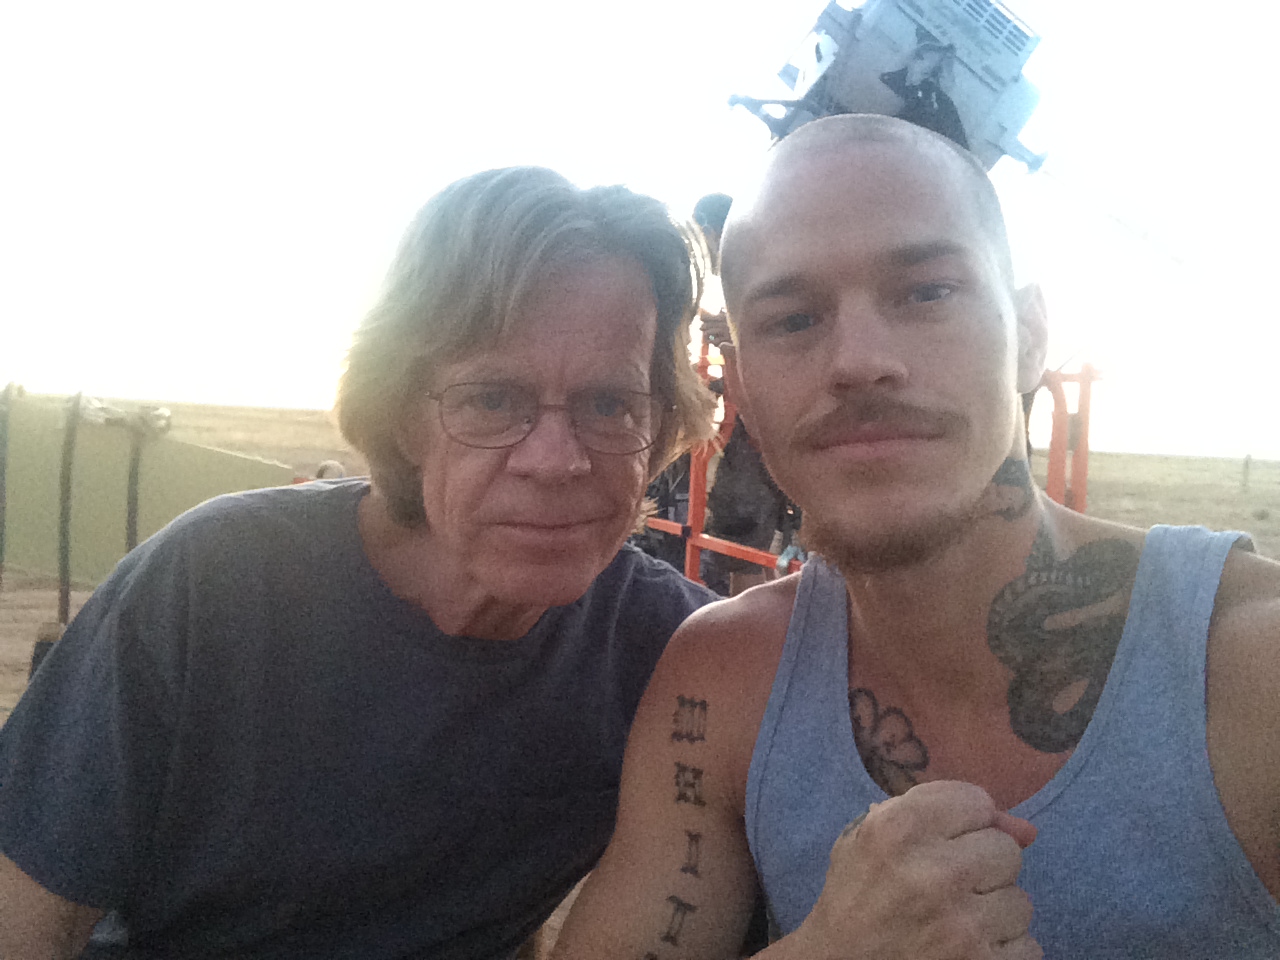 On set of BLOODFATHER with William H. Macy